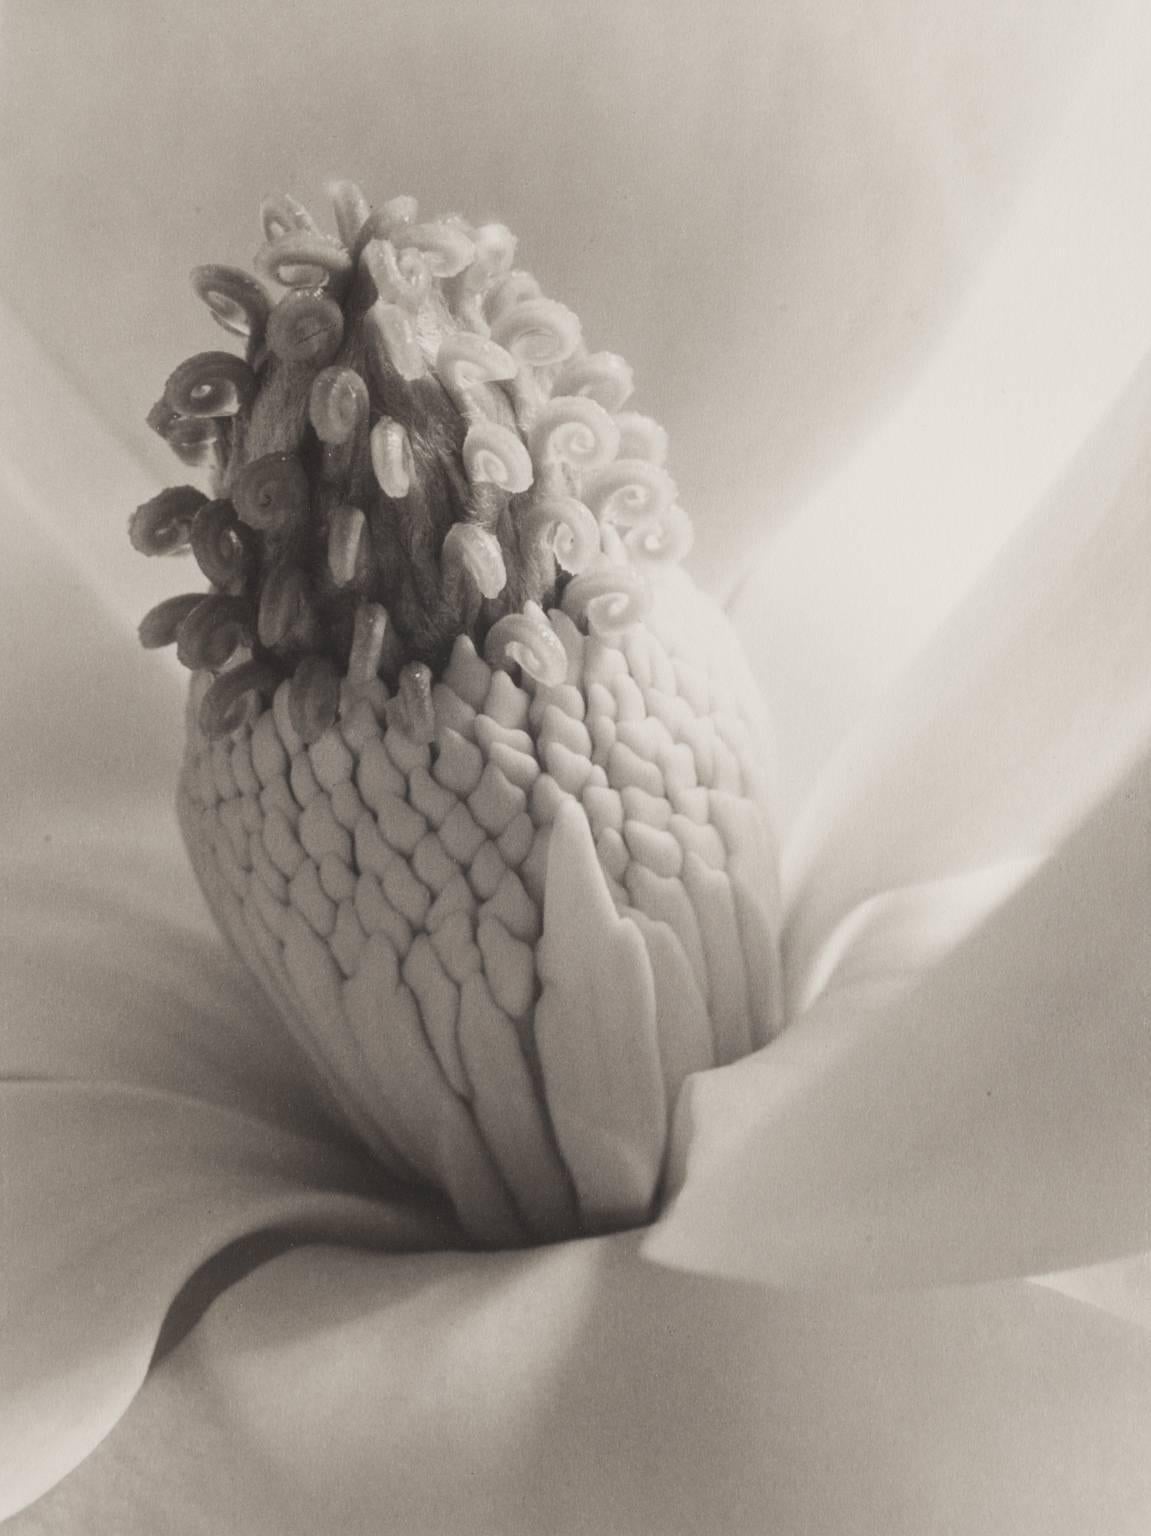 Imogen Cunningham Black and White Photograph - Magnolia Blossom, Tower of Jewels